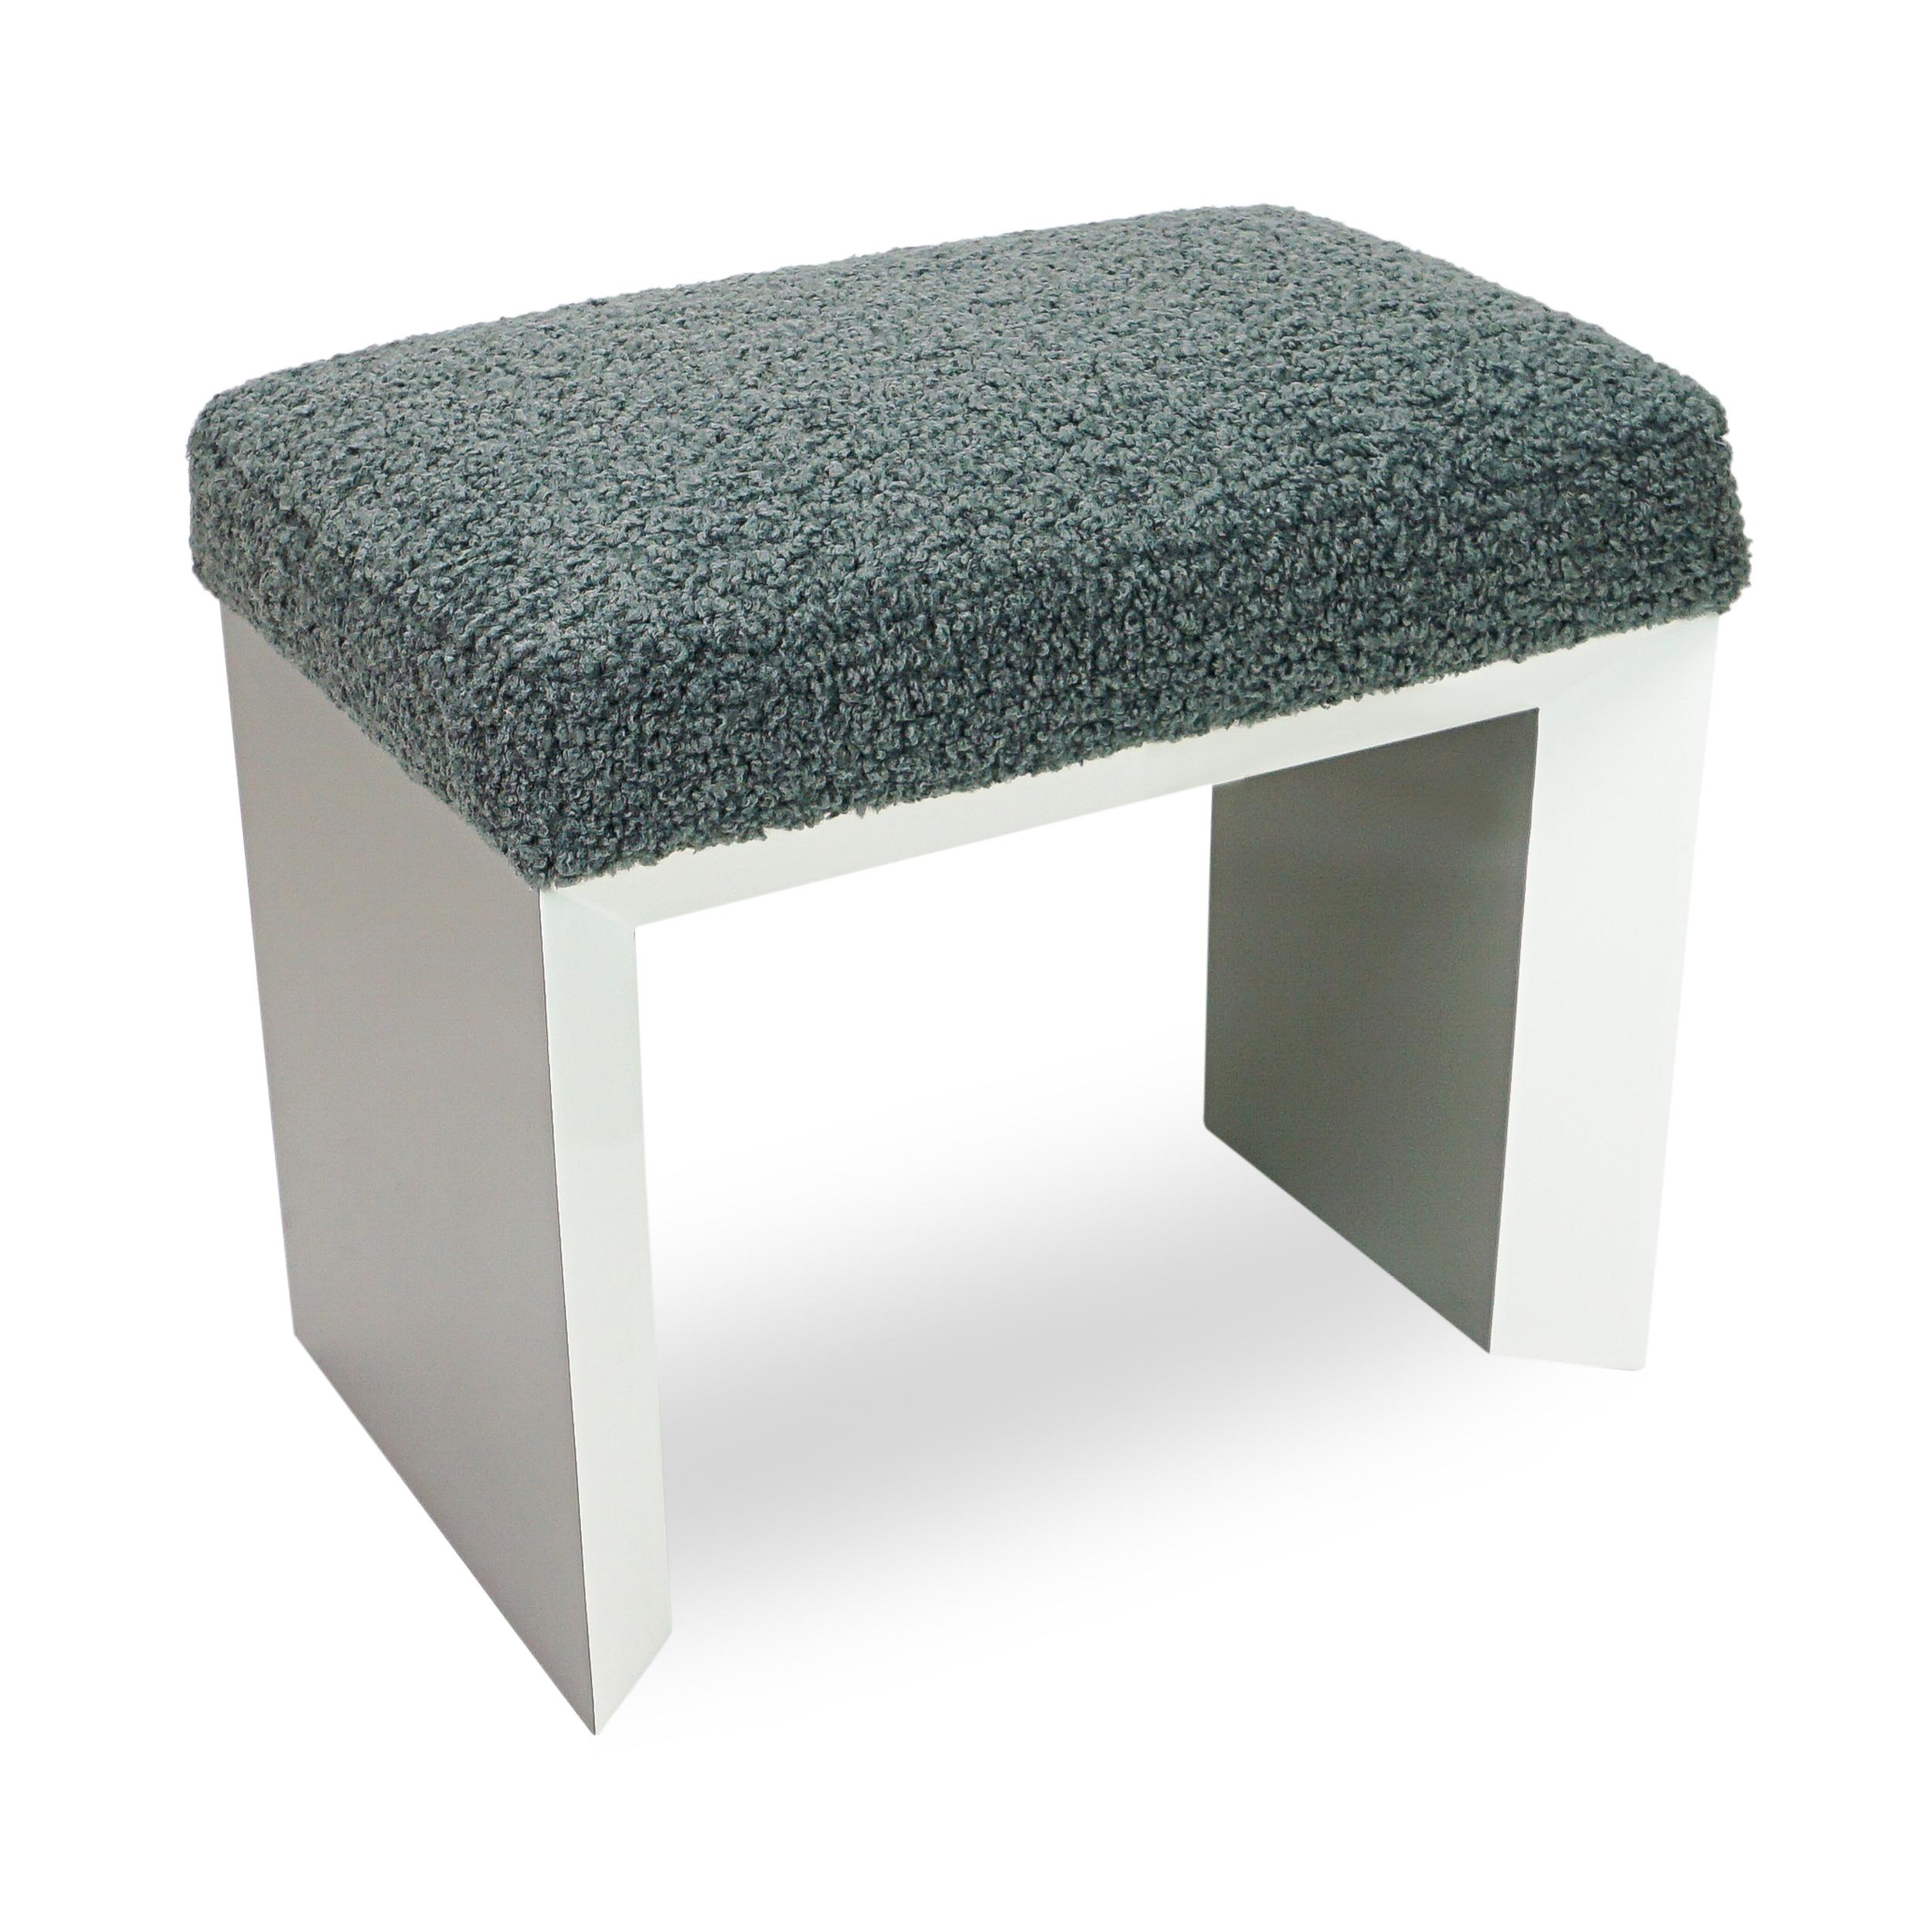 A new take on a classically shaped modern bench with its 3 inch beveled white lacquered base contrasting with a soft wooly grey upholstered seat, this piece is an excellent addition for extra seating and will fit into any modern to eclectic styled